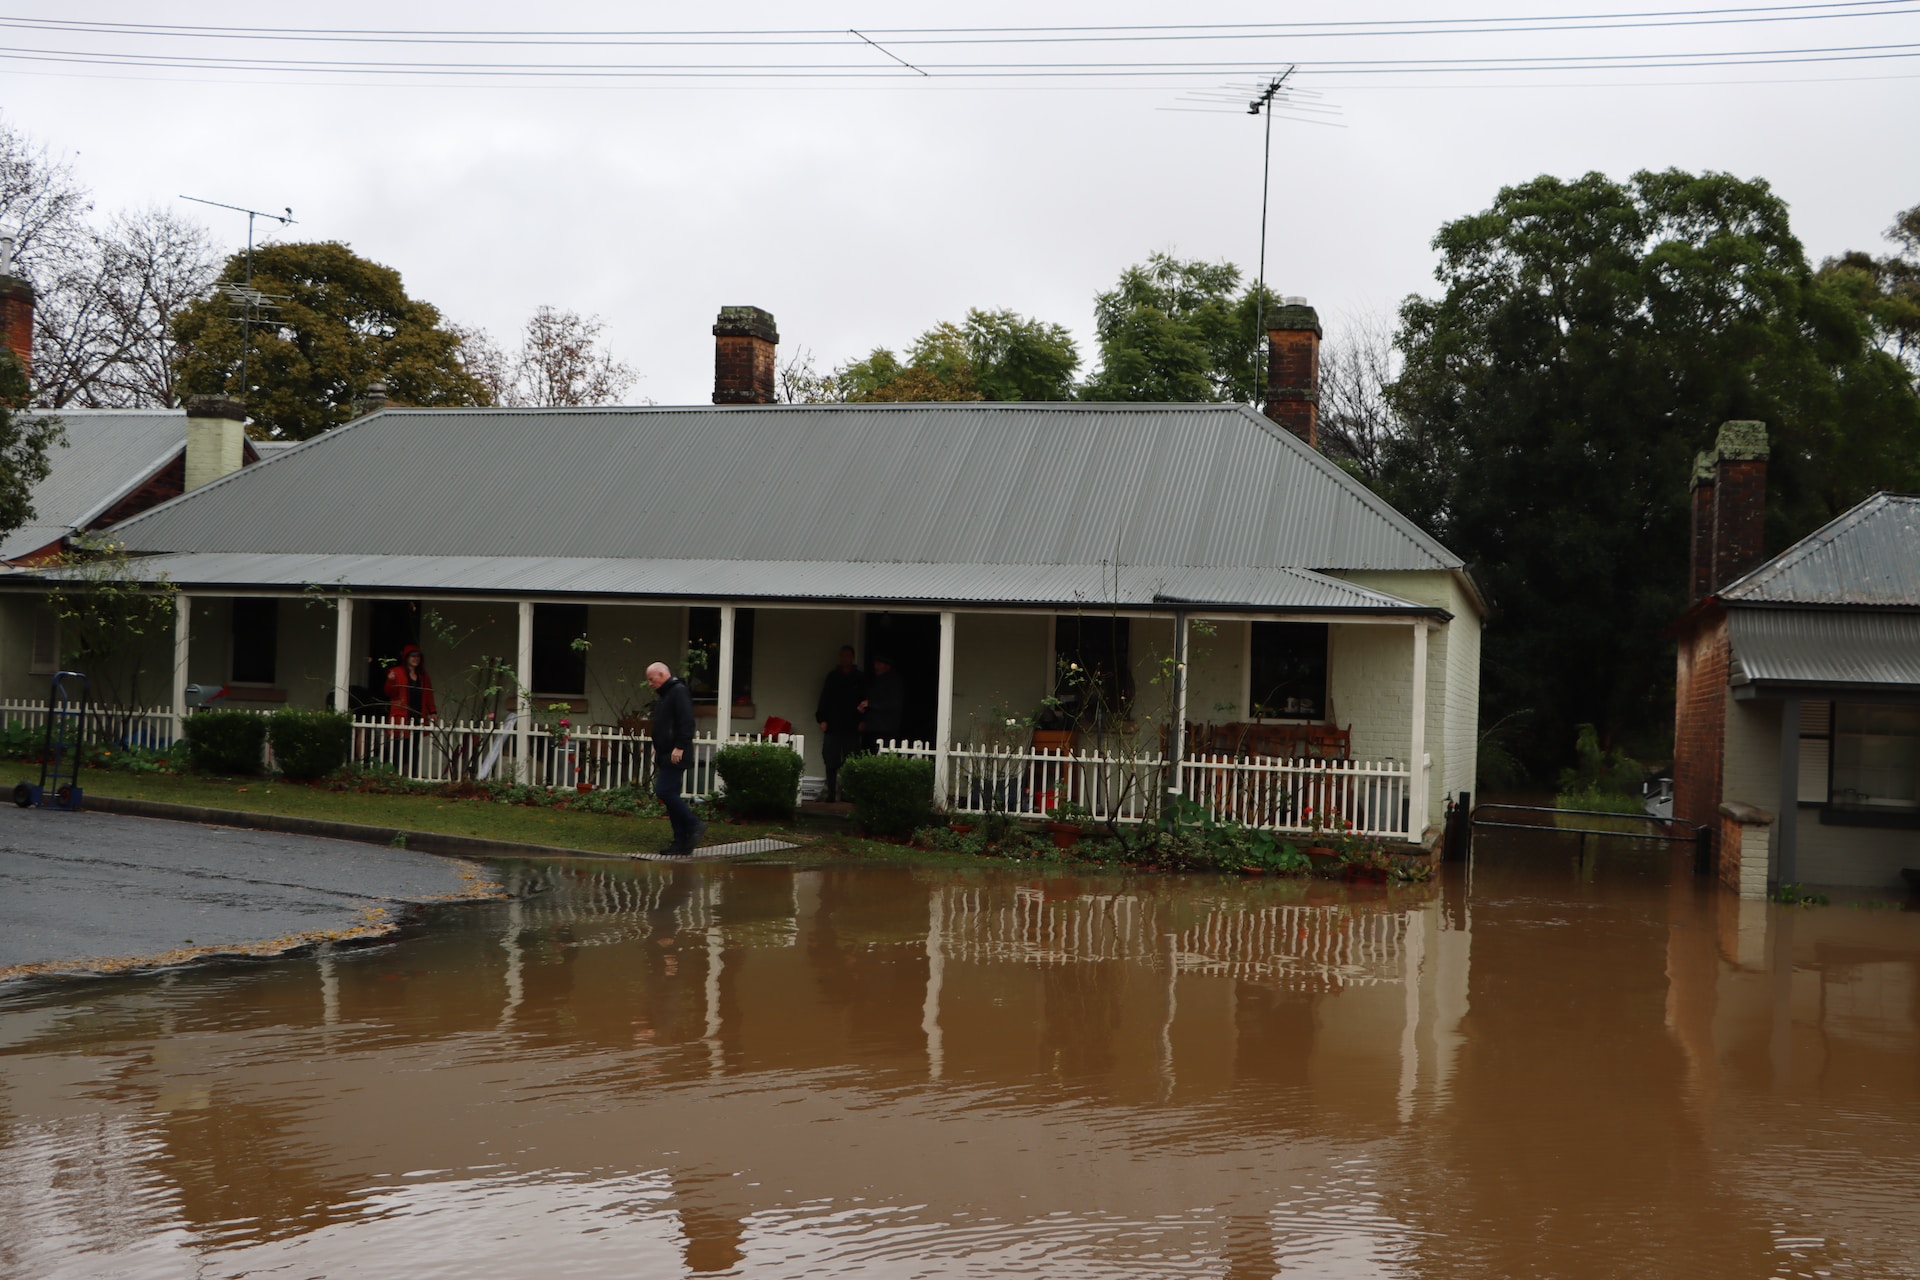 Govt and councils buying out flood affected properties – Expert Reaction